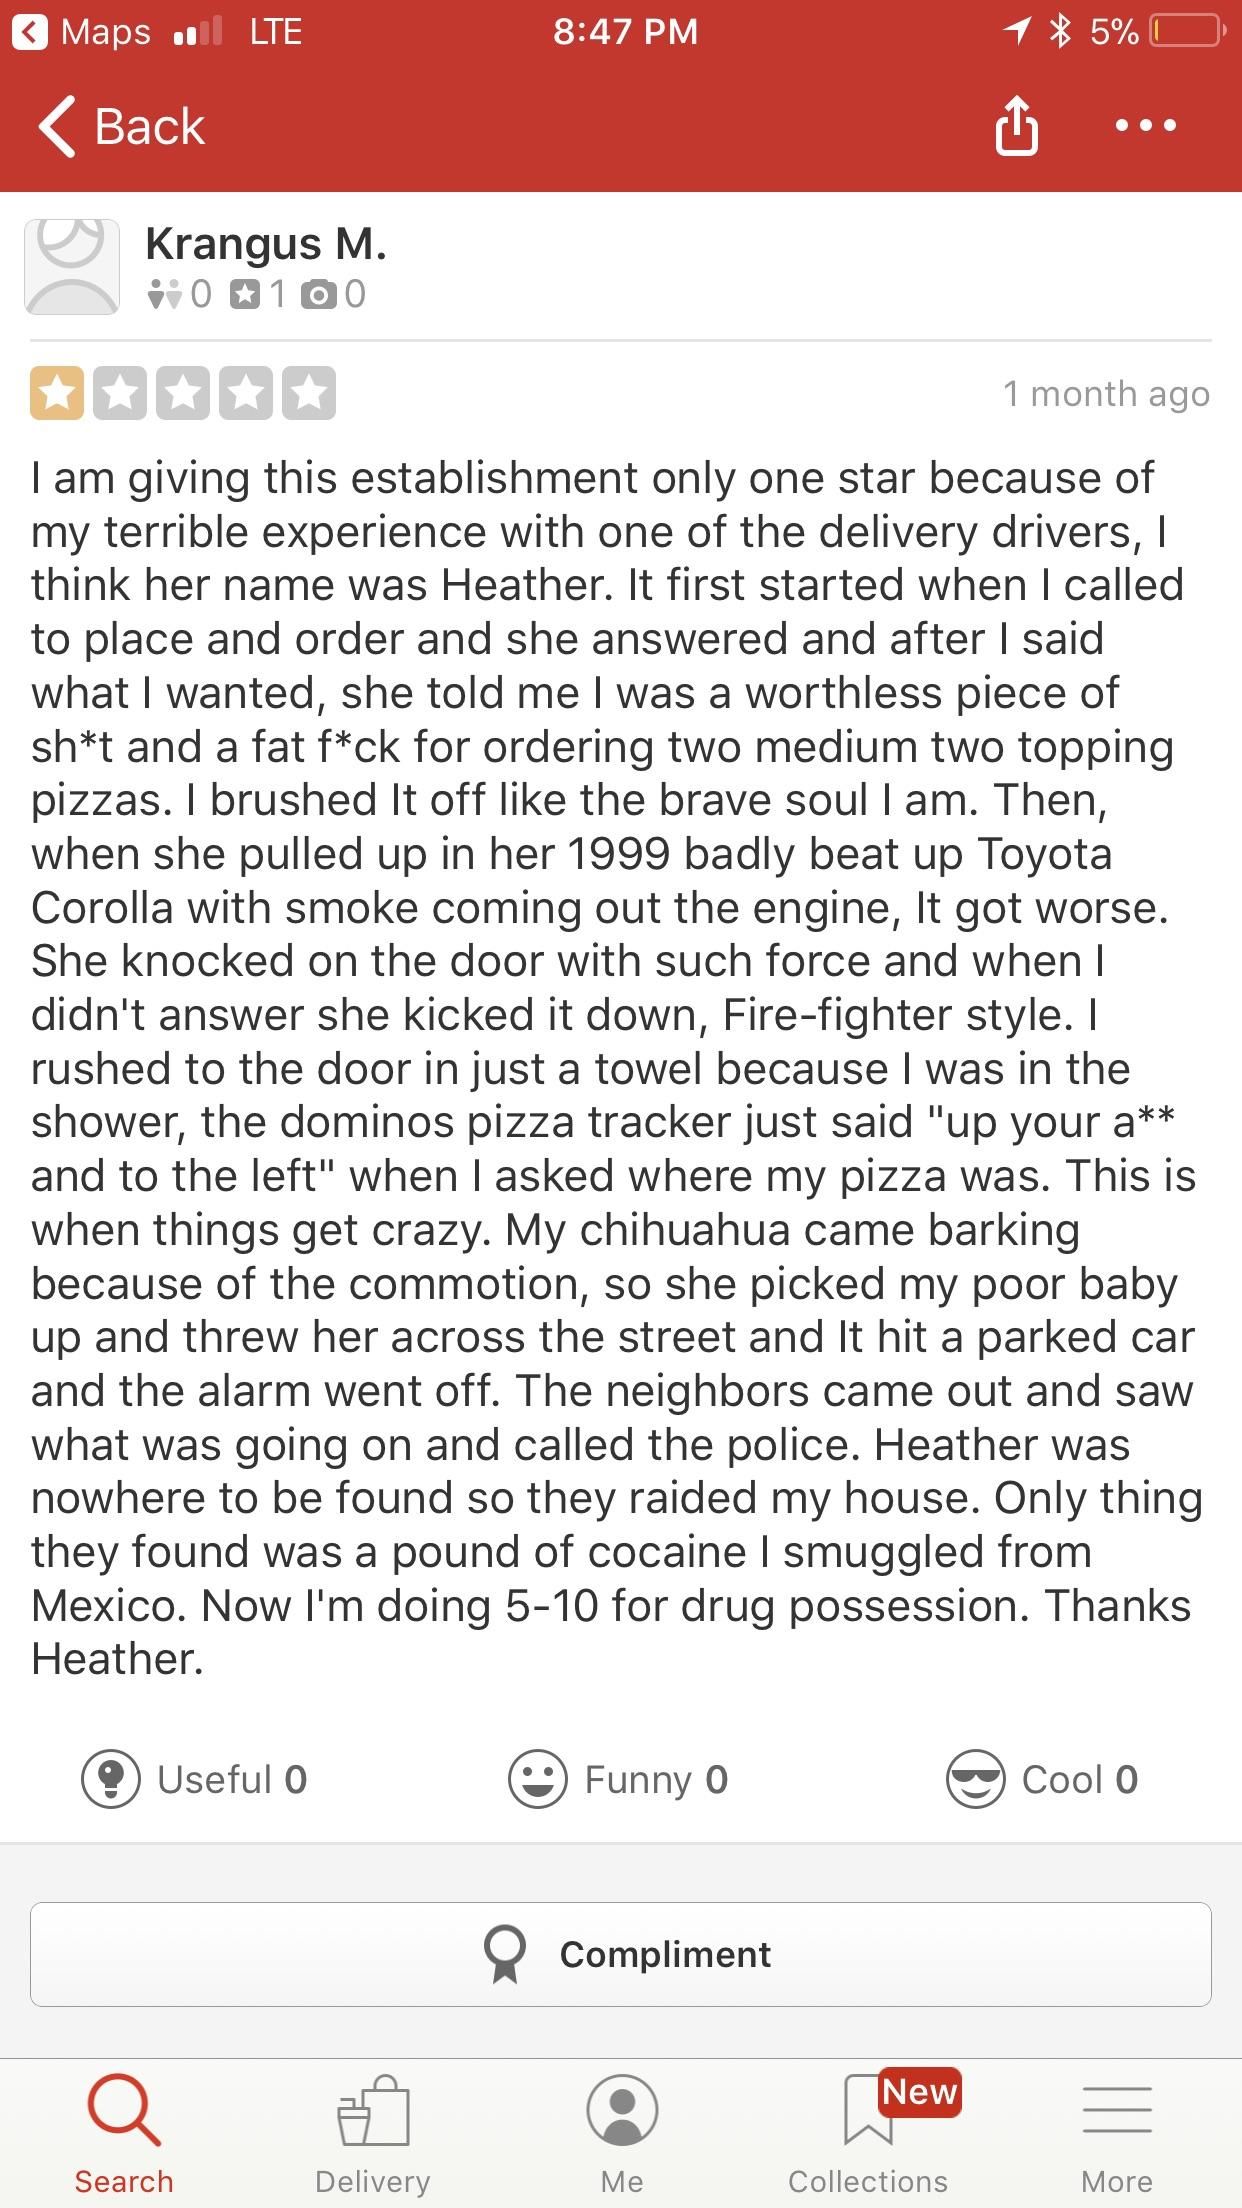 This is a legitimate yelp review I found for my local domino’s before ordering delivery. I can’t stop laughing.